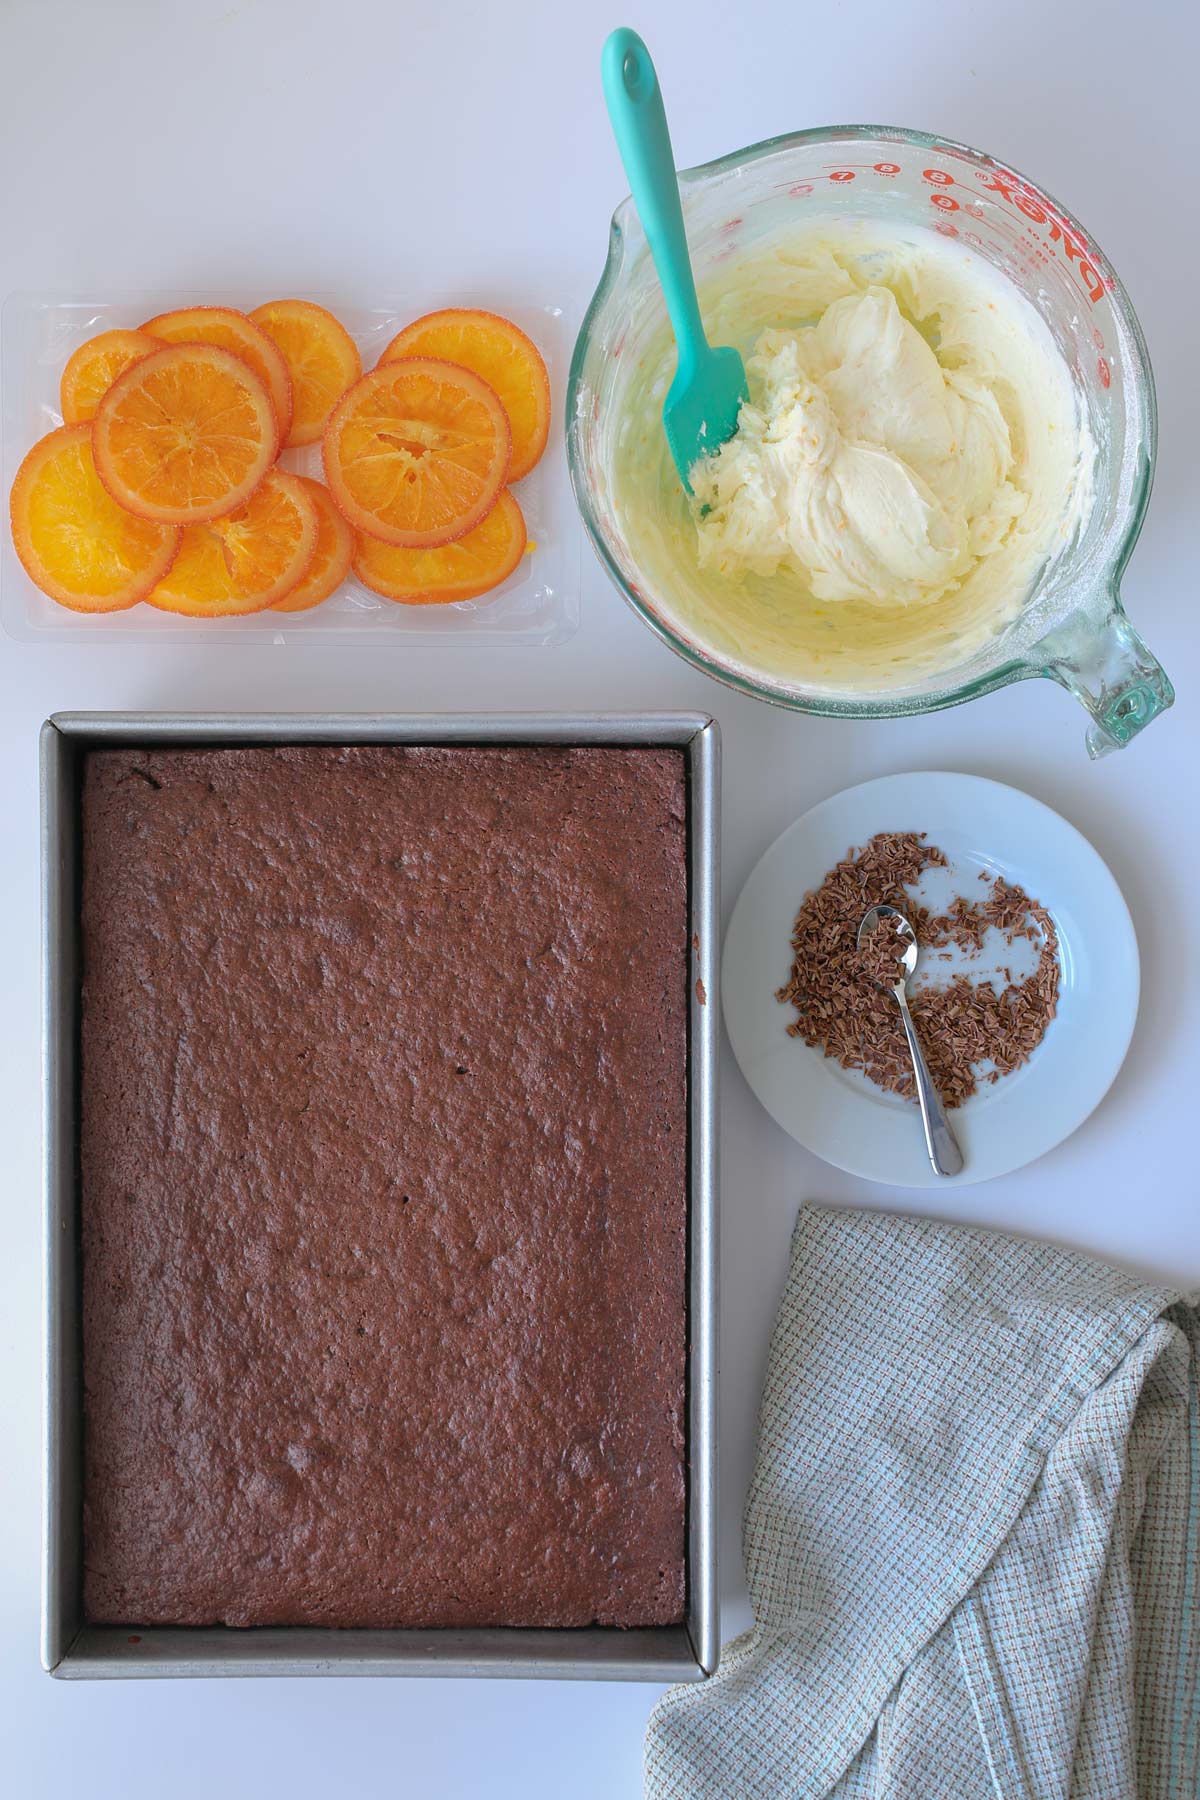 baked cake, bowl of frosting, and garnishes.